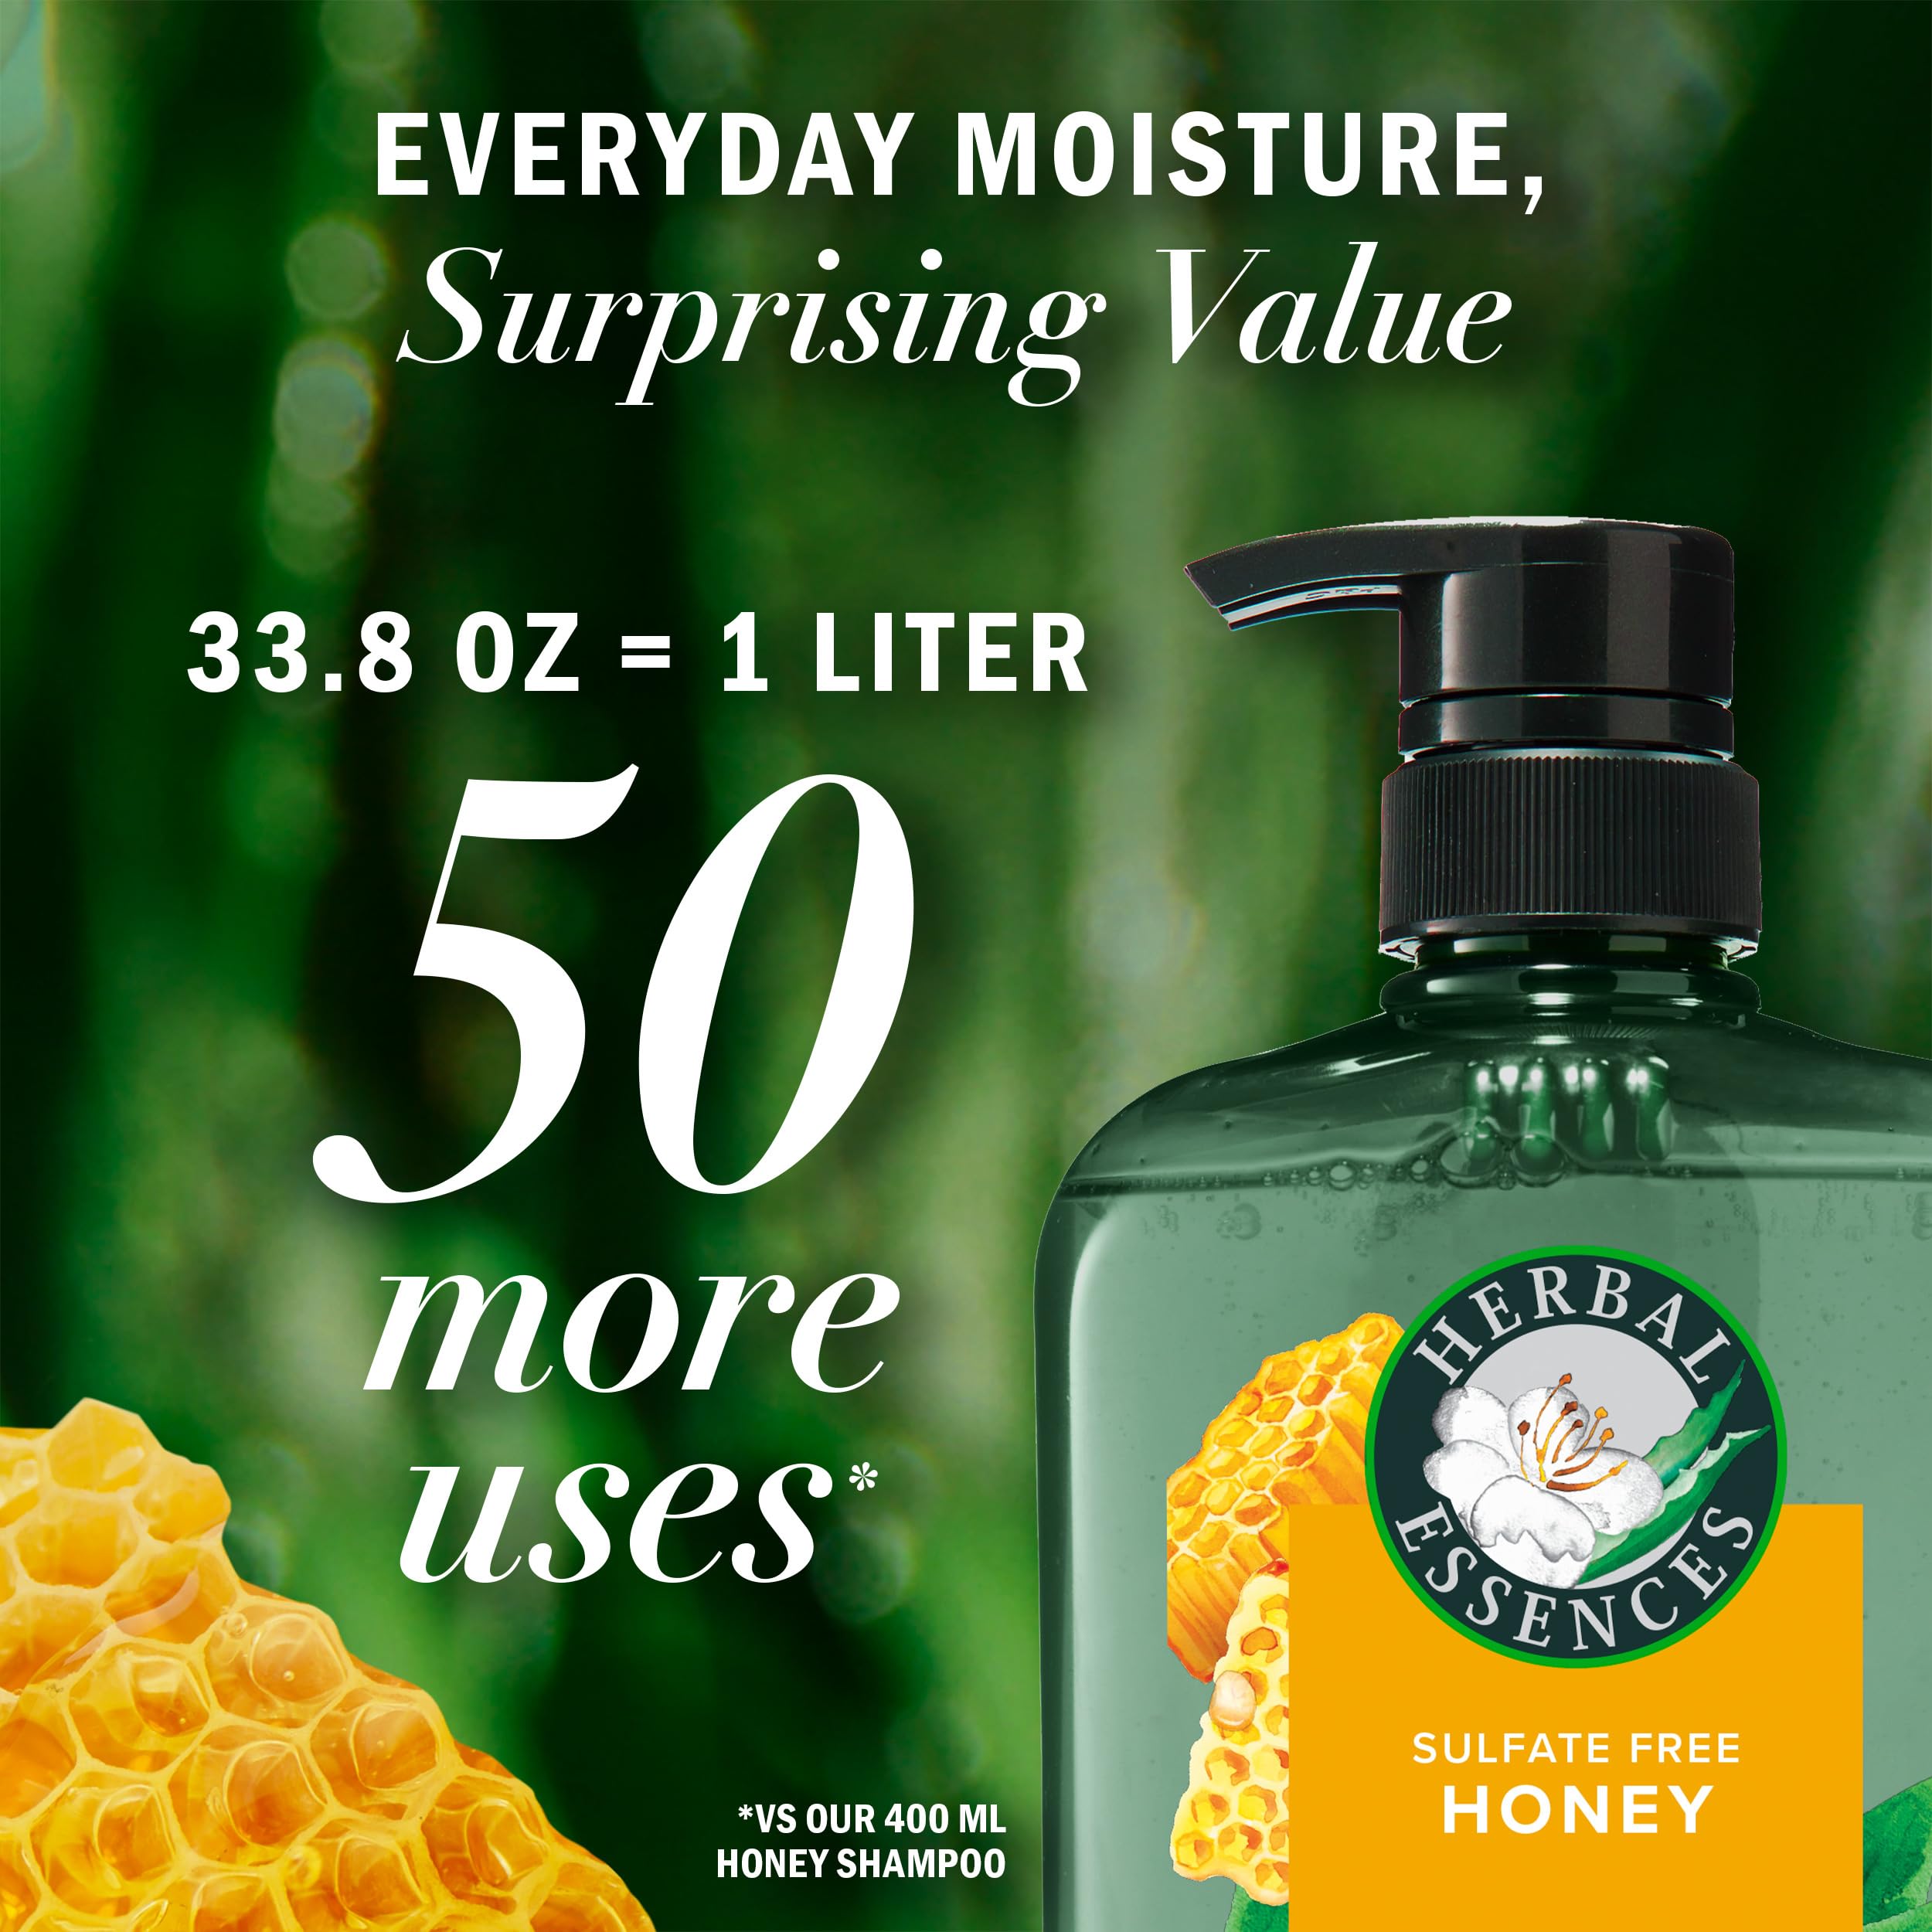 Herbal Essences Sulfate Free Shampoo with Honey for Daily Moisture, Nourishes Dry Hair, Moisturizing Shampoo with Certified Camellia Oil and Aloe Vera, Lightweight For All Hair Types, 33.8oz